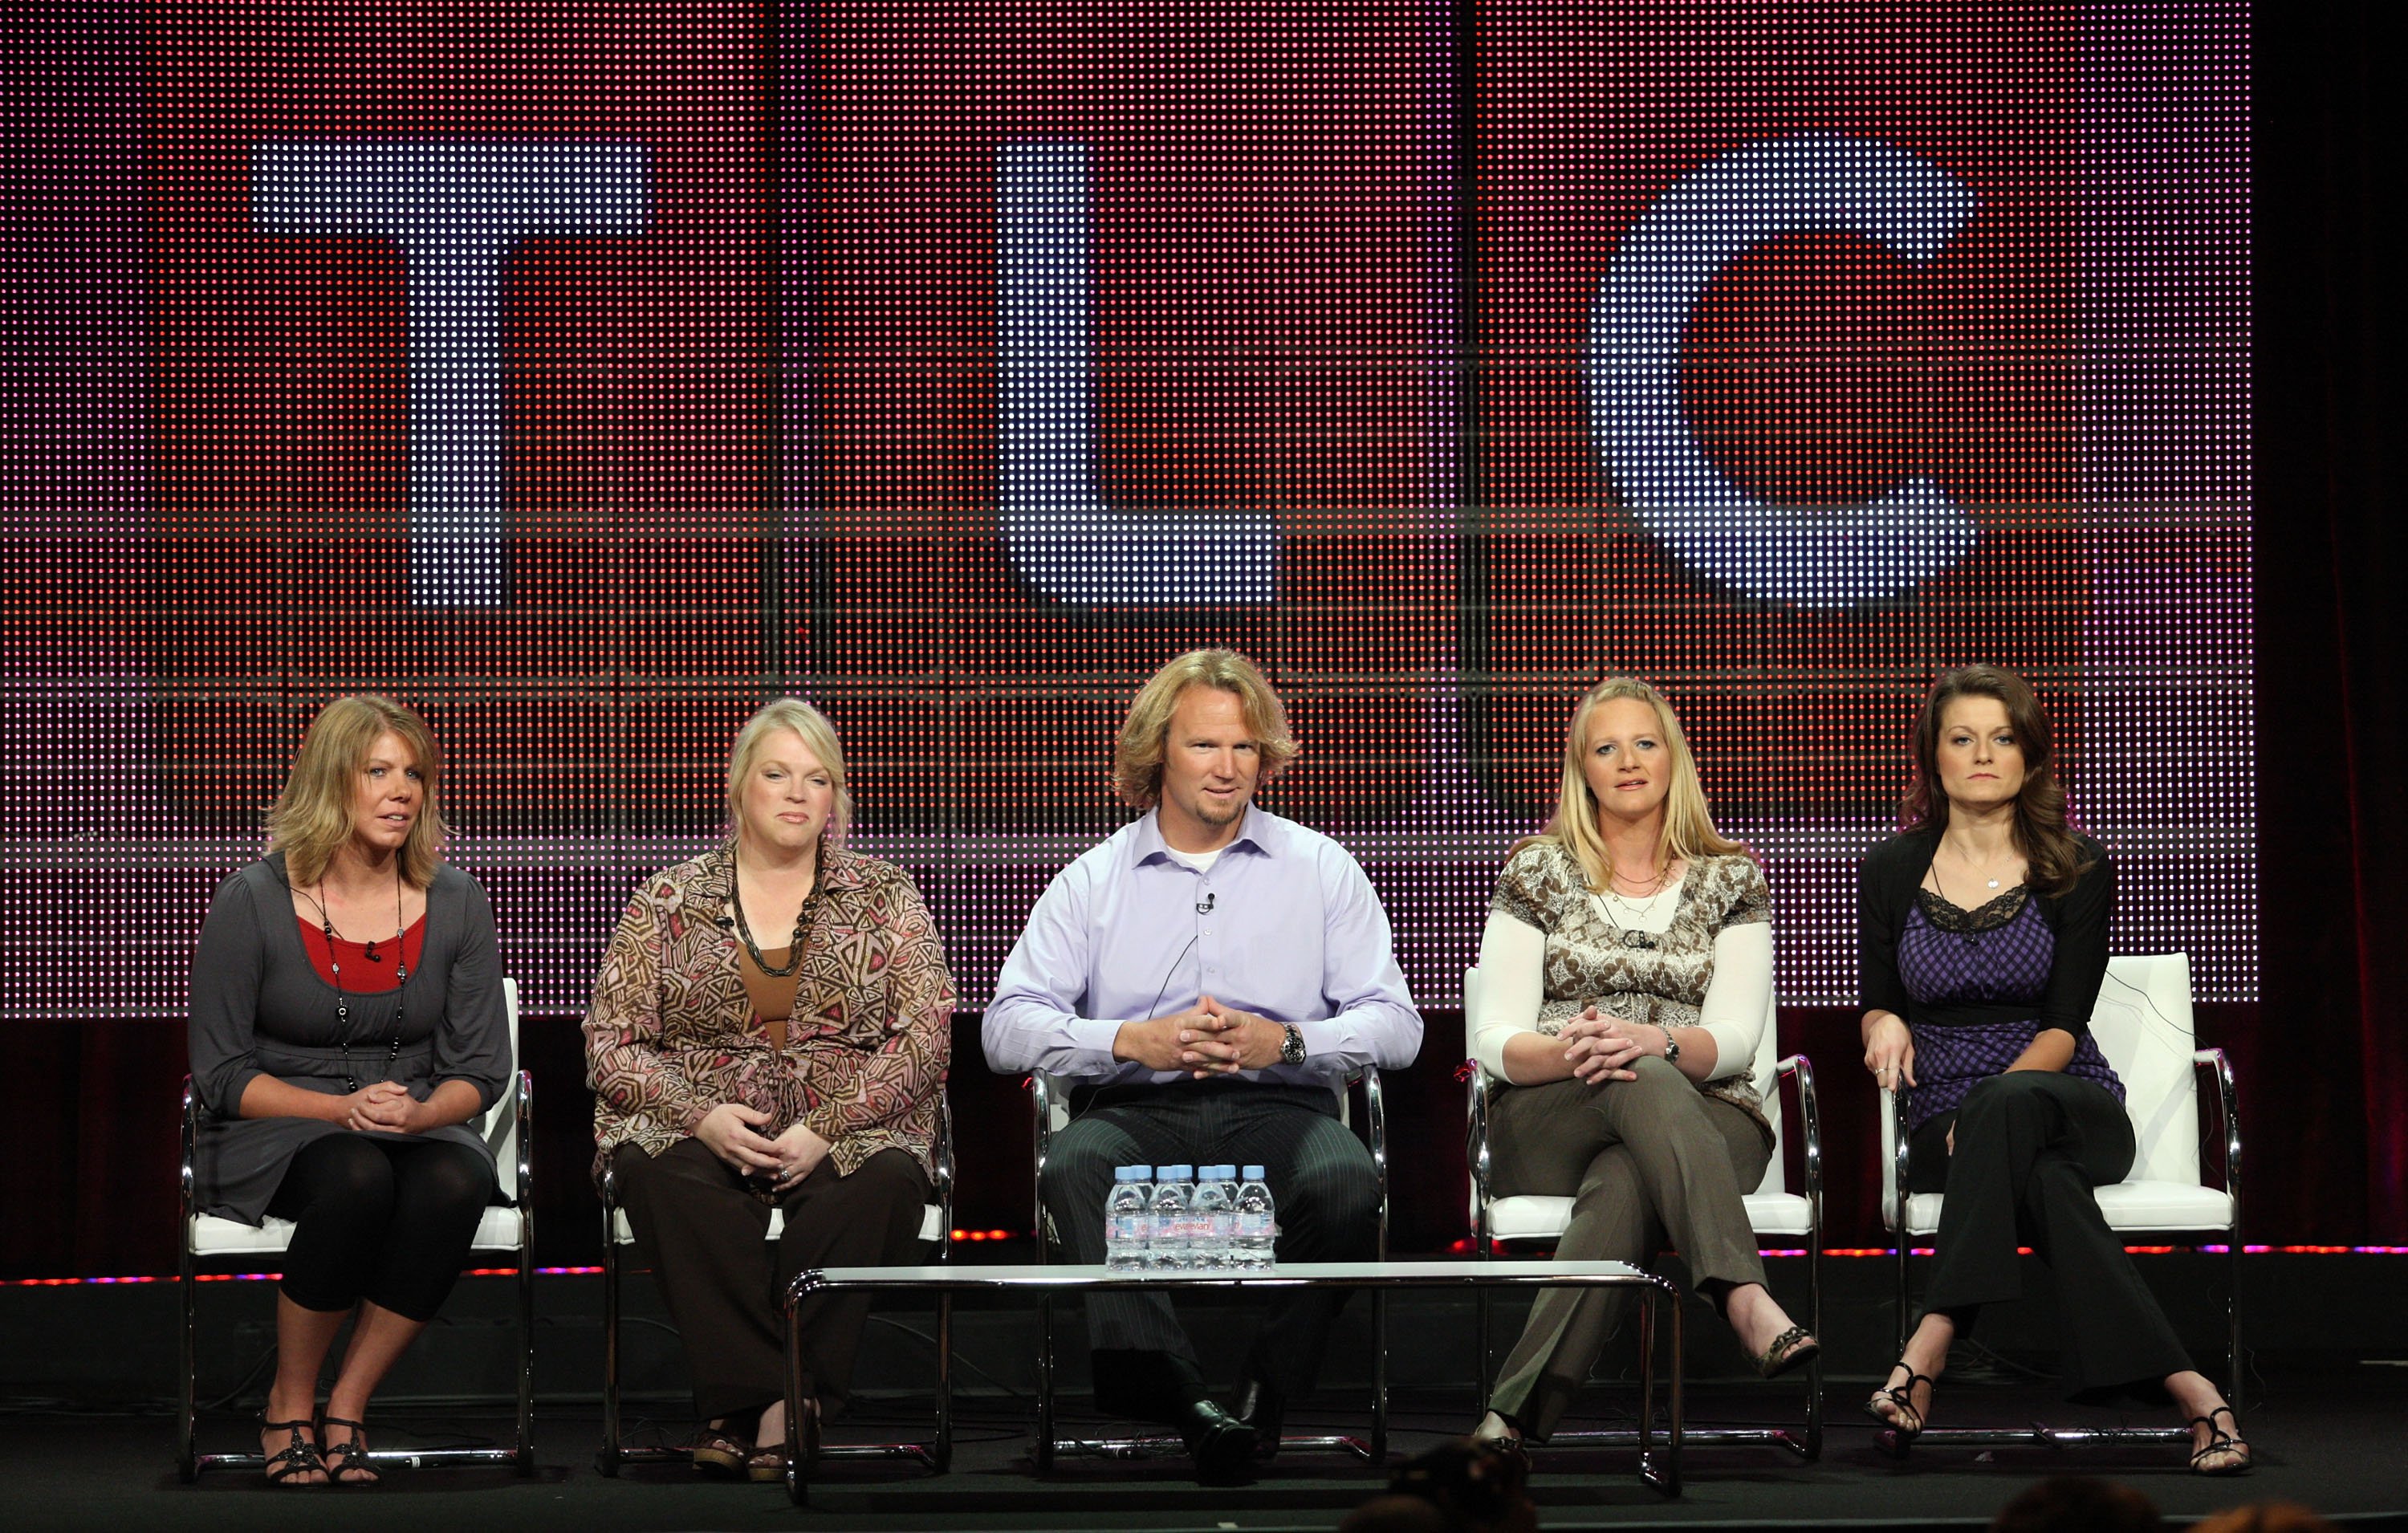 Meri, Janelle, Kody, Christine, and Robyn Brown during the "Sister Wives" panel on the Summer TCA press tour on August 6, 2010, in Beverly Hills, California. | Source: Getty Images